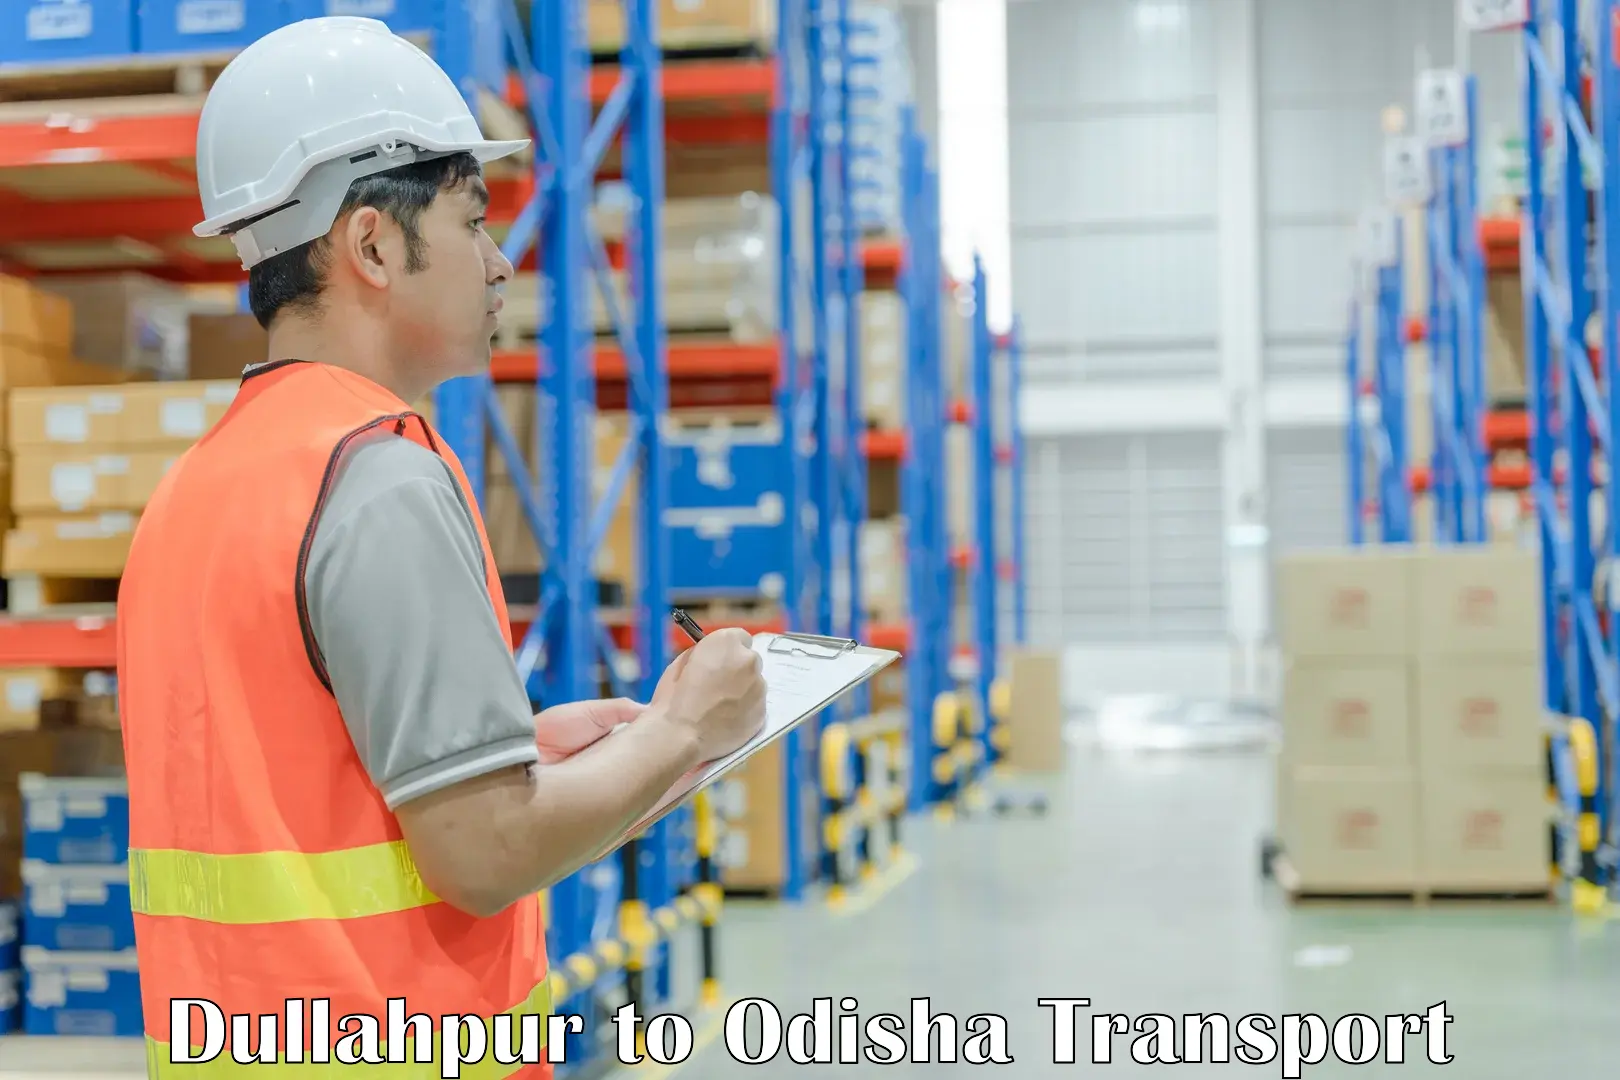 Air freight transport services Dullahpur to Odisha